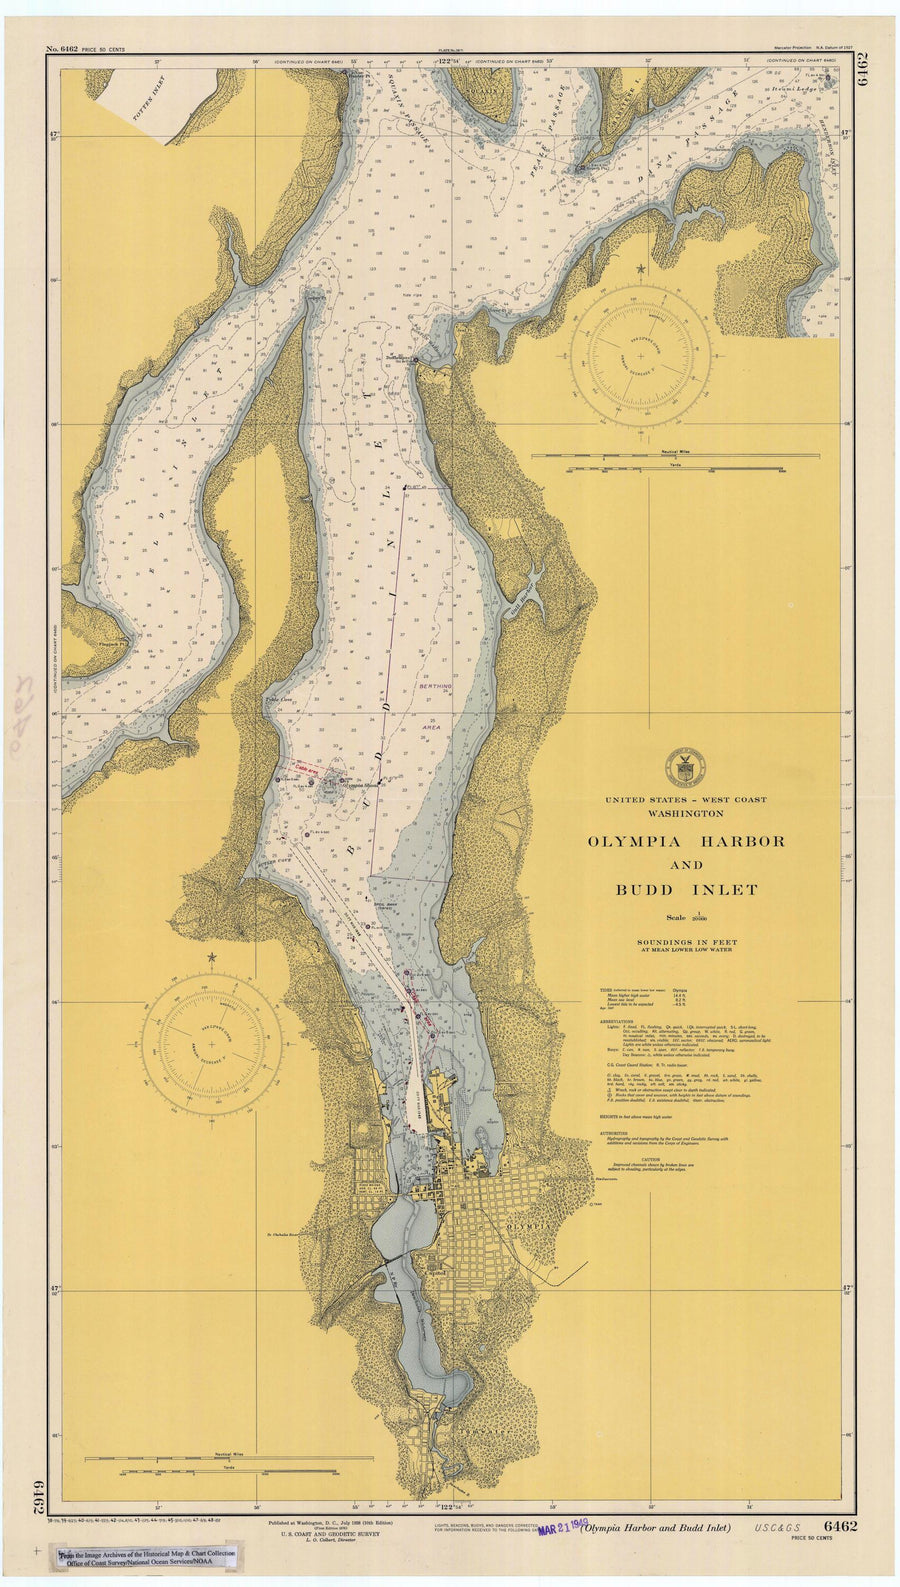 Olympia Harbor and Budd Inlet Map - 1948